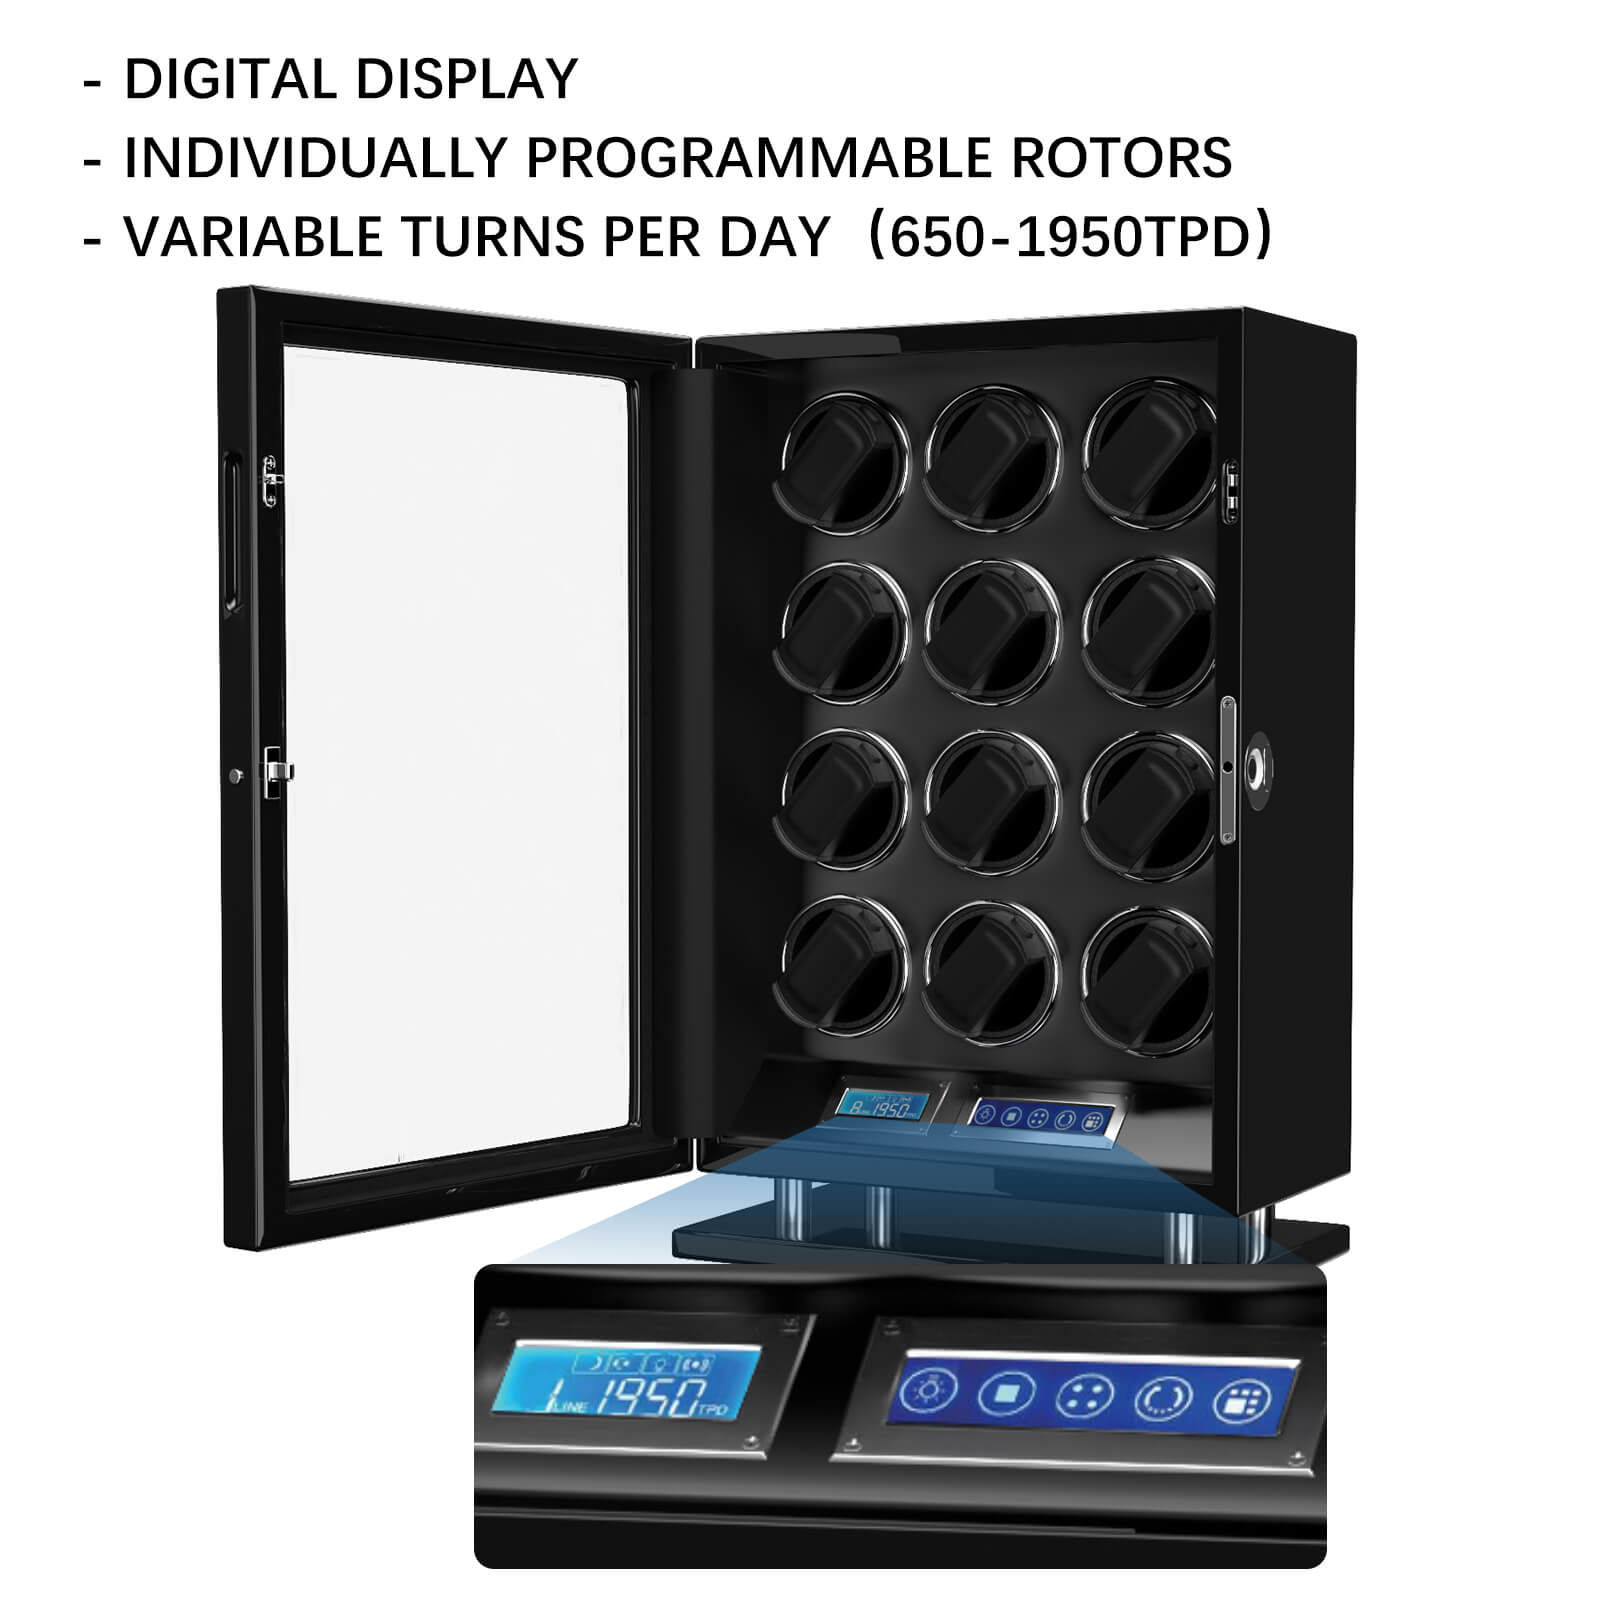 Fingerprint Unlock Watch Winder for 12 Automatic Watches with LCD Touchscreen Control